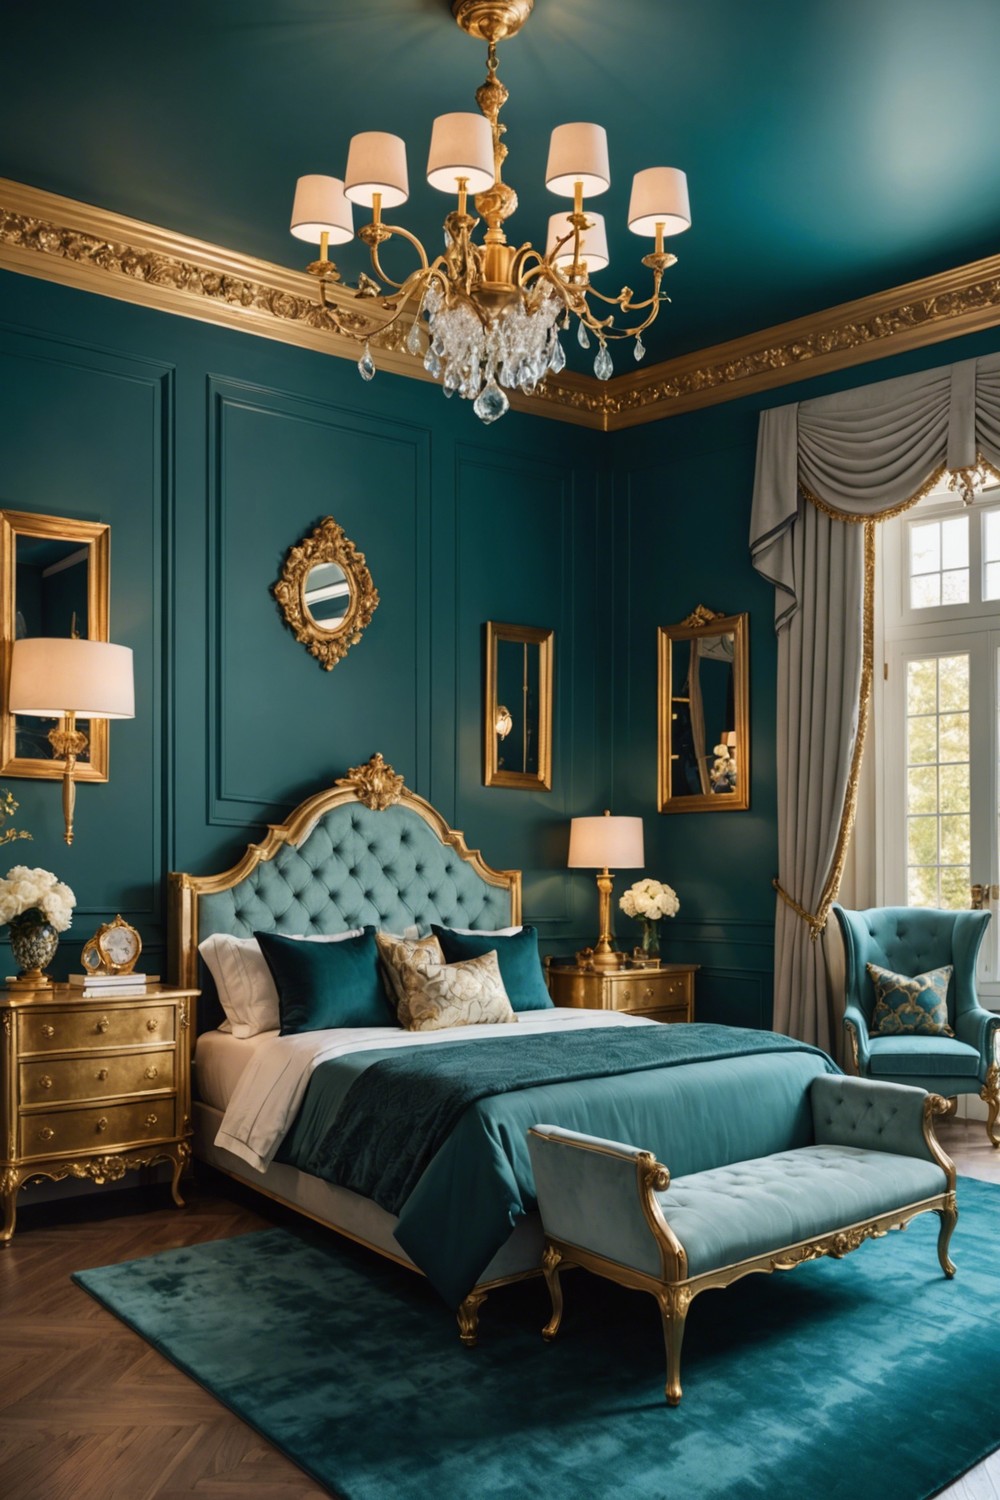 Luxe and Sophisticated: Teal and Gold